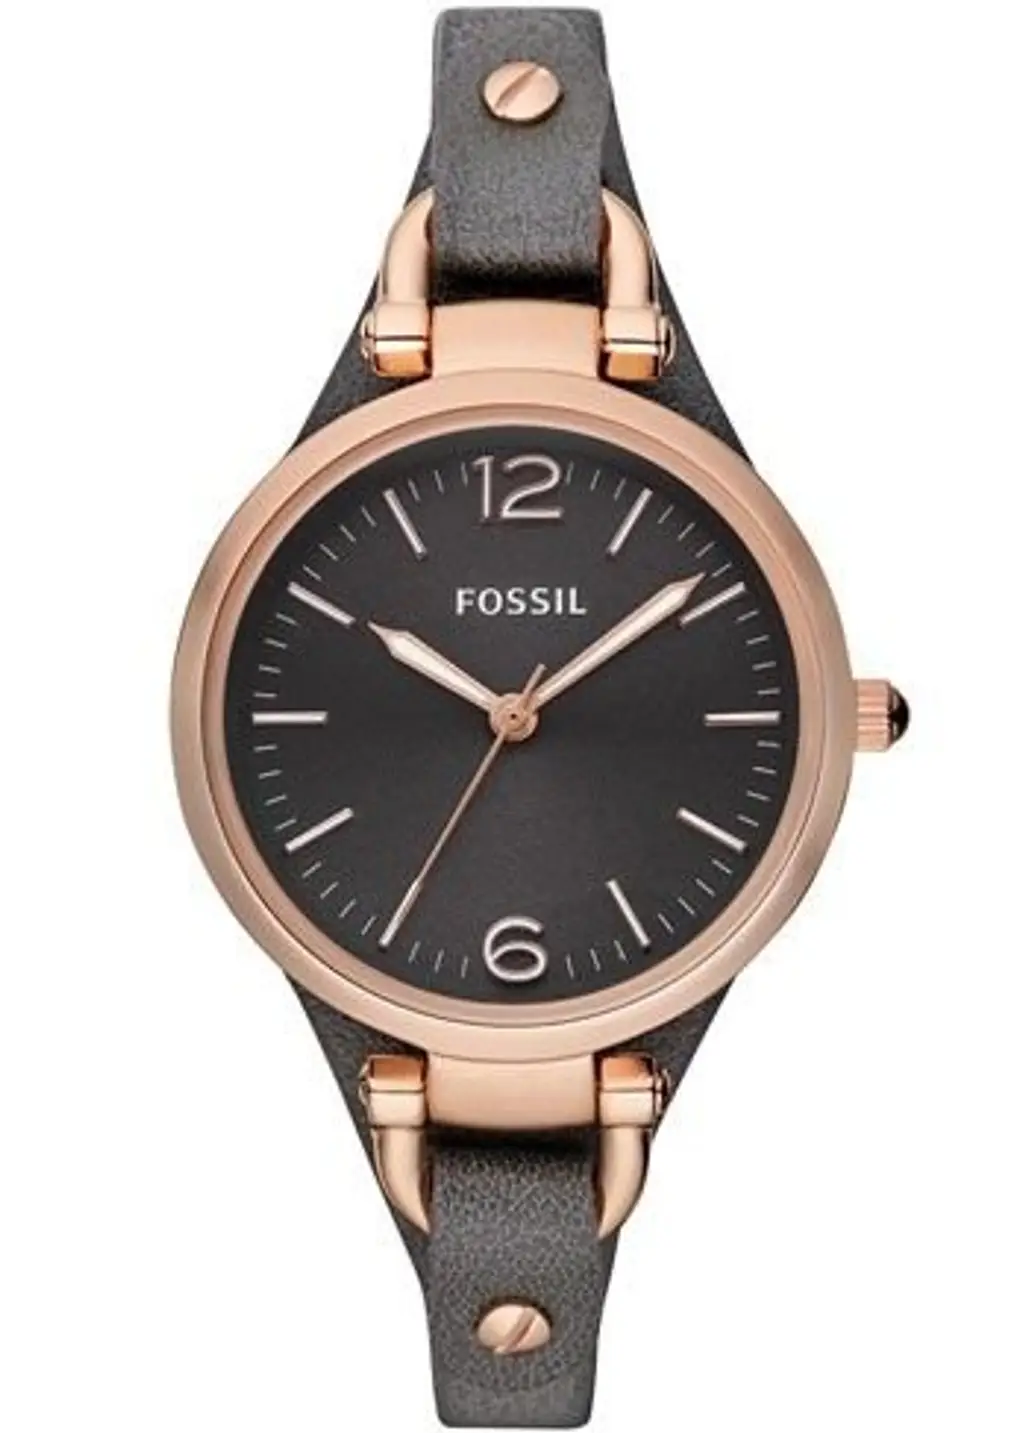 Fossil 'Georgia' Leather Strap Watch